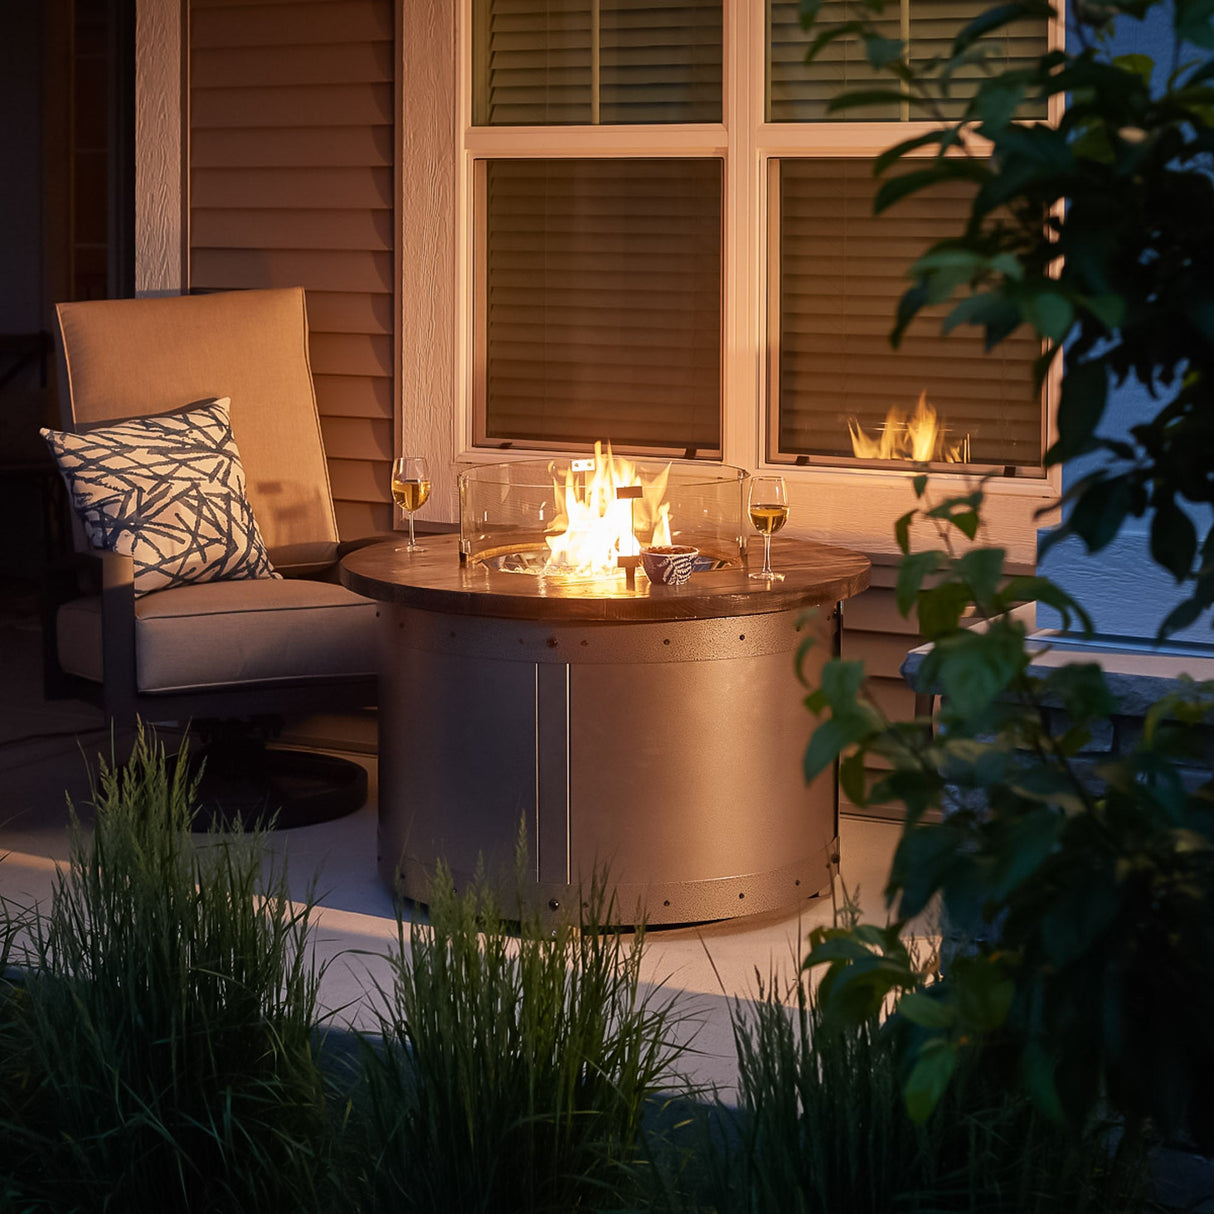 The Edison Round Gas Fire Pit Table being used as a table with food and drink around the outside